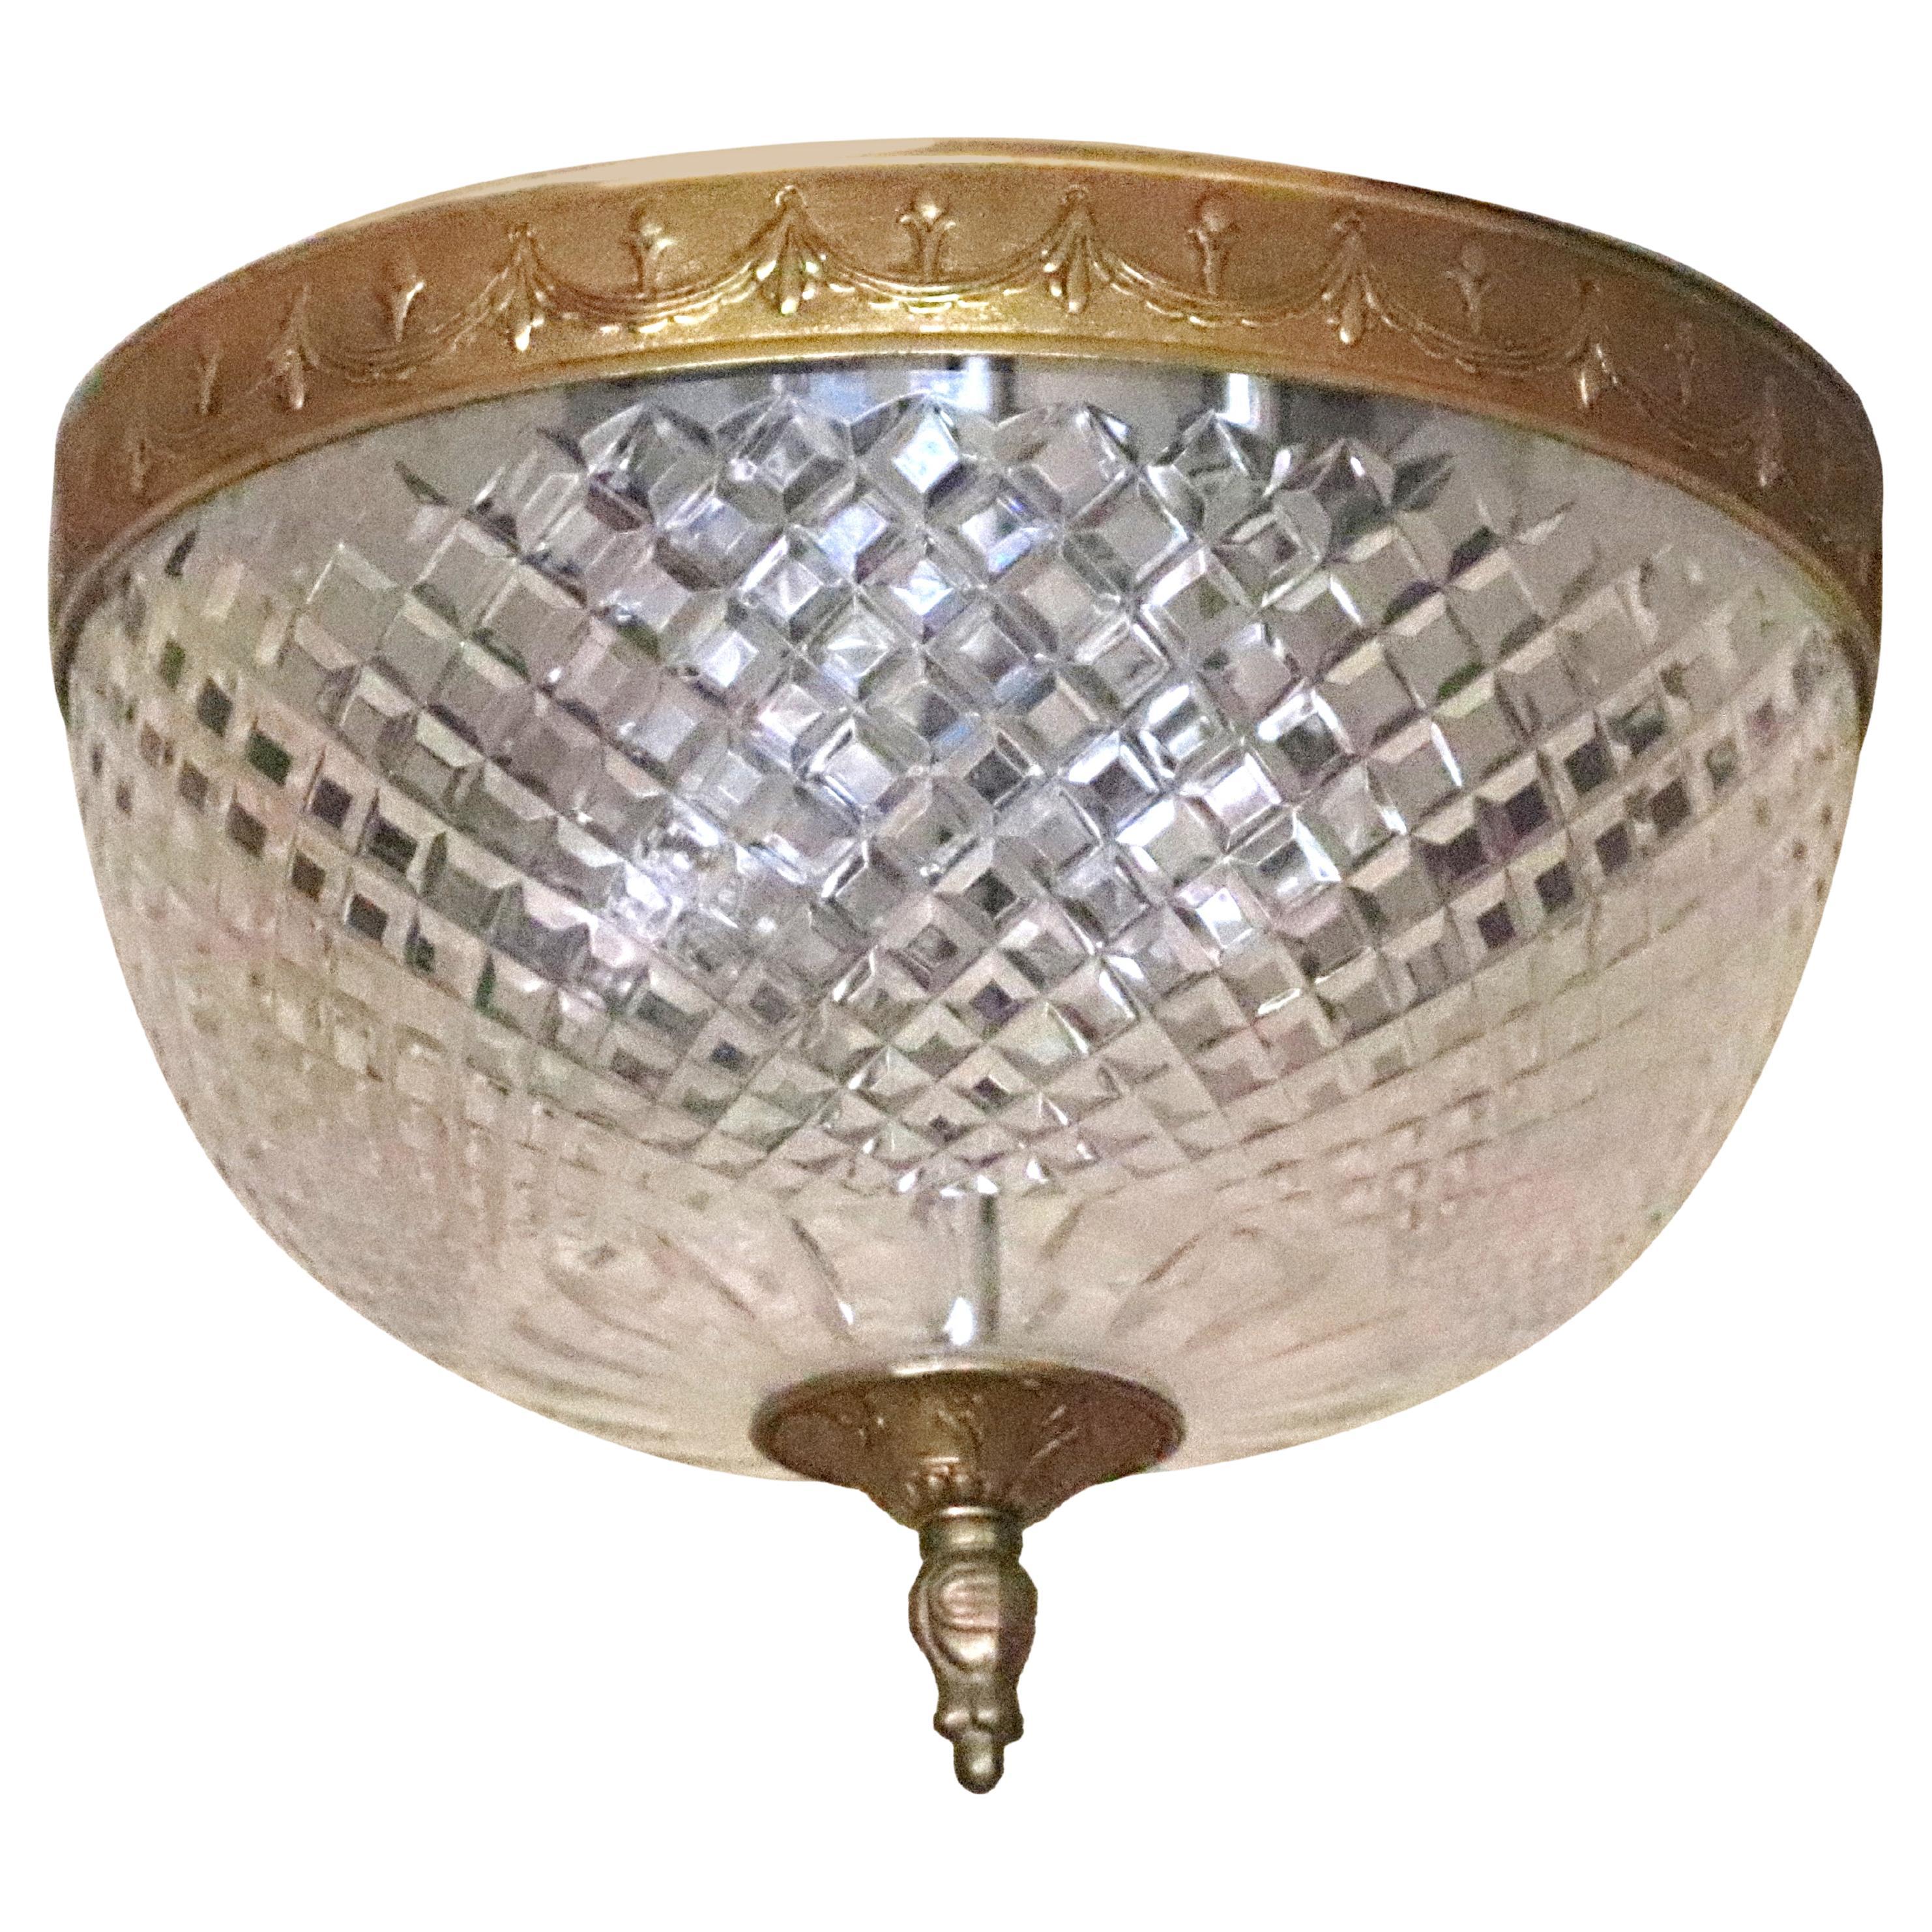 Waldorf Astoria Hotel Crystal Brass Flush Mount Light Qty Available NYC Park Ave